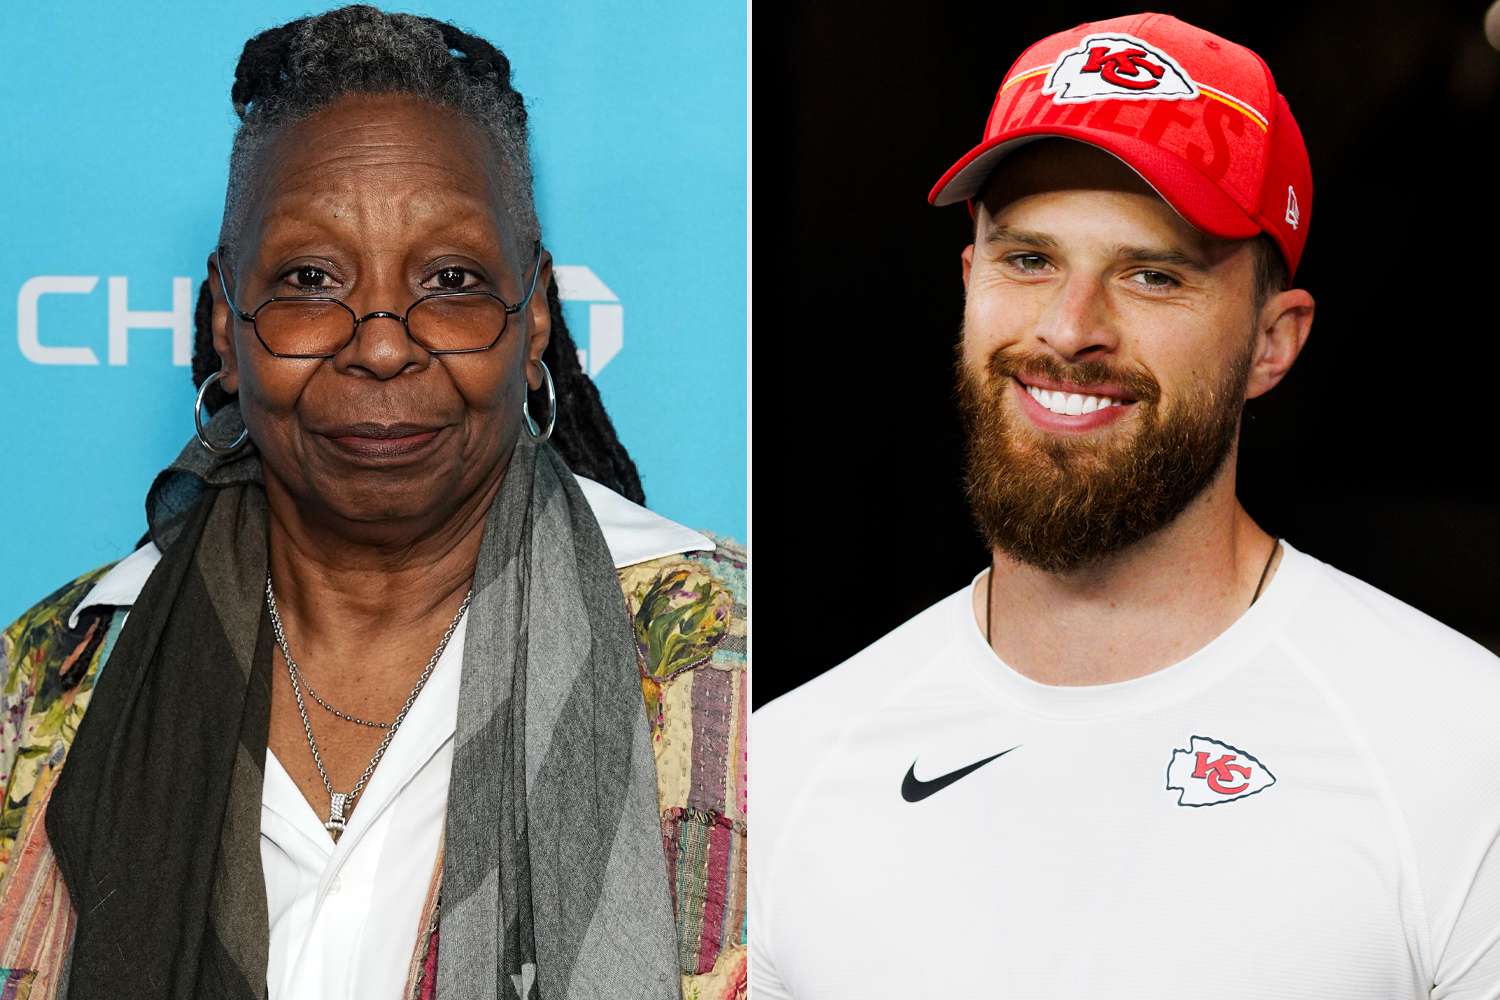 Whoopi Goldberg Defends Harrison Butker After Controversial Graduation Speech: ‘These Are His Beliefs’